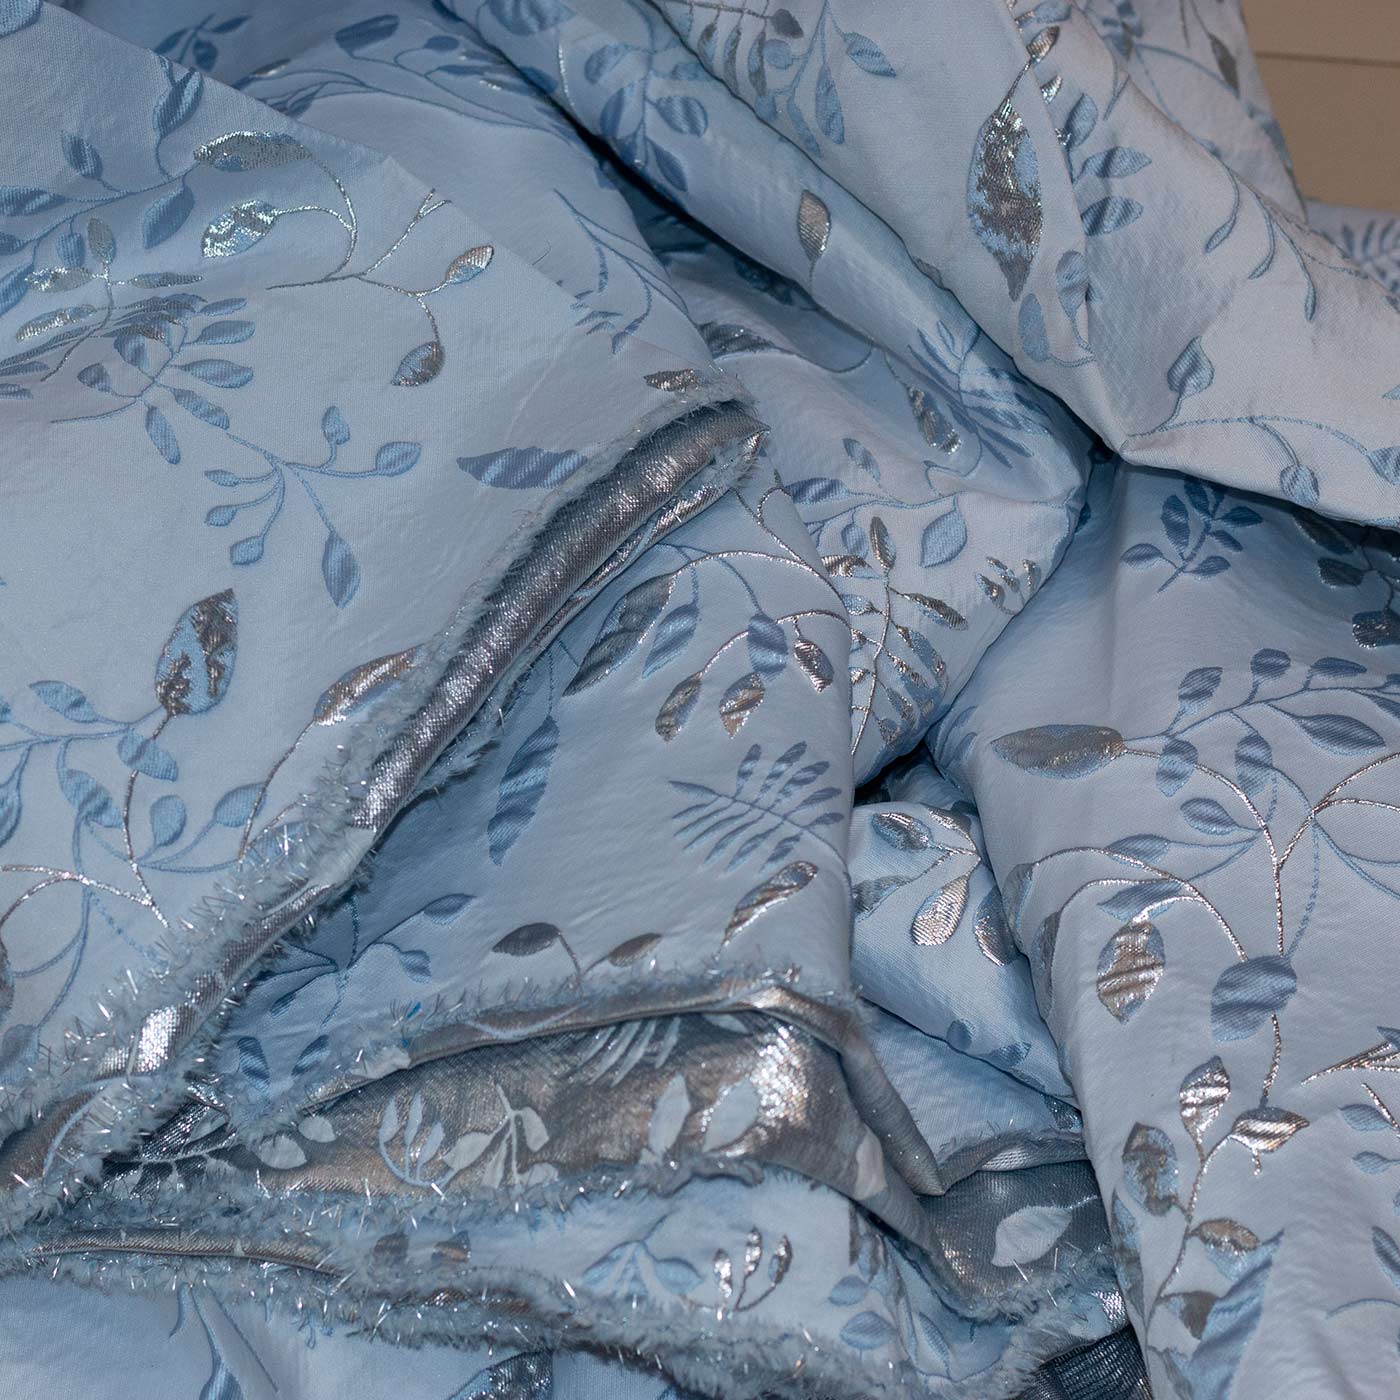 Silver and Powder Blue on Sky Blue Floral Brocade Fabric